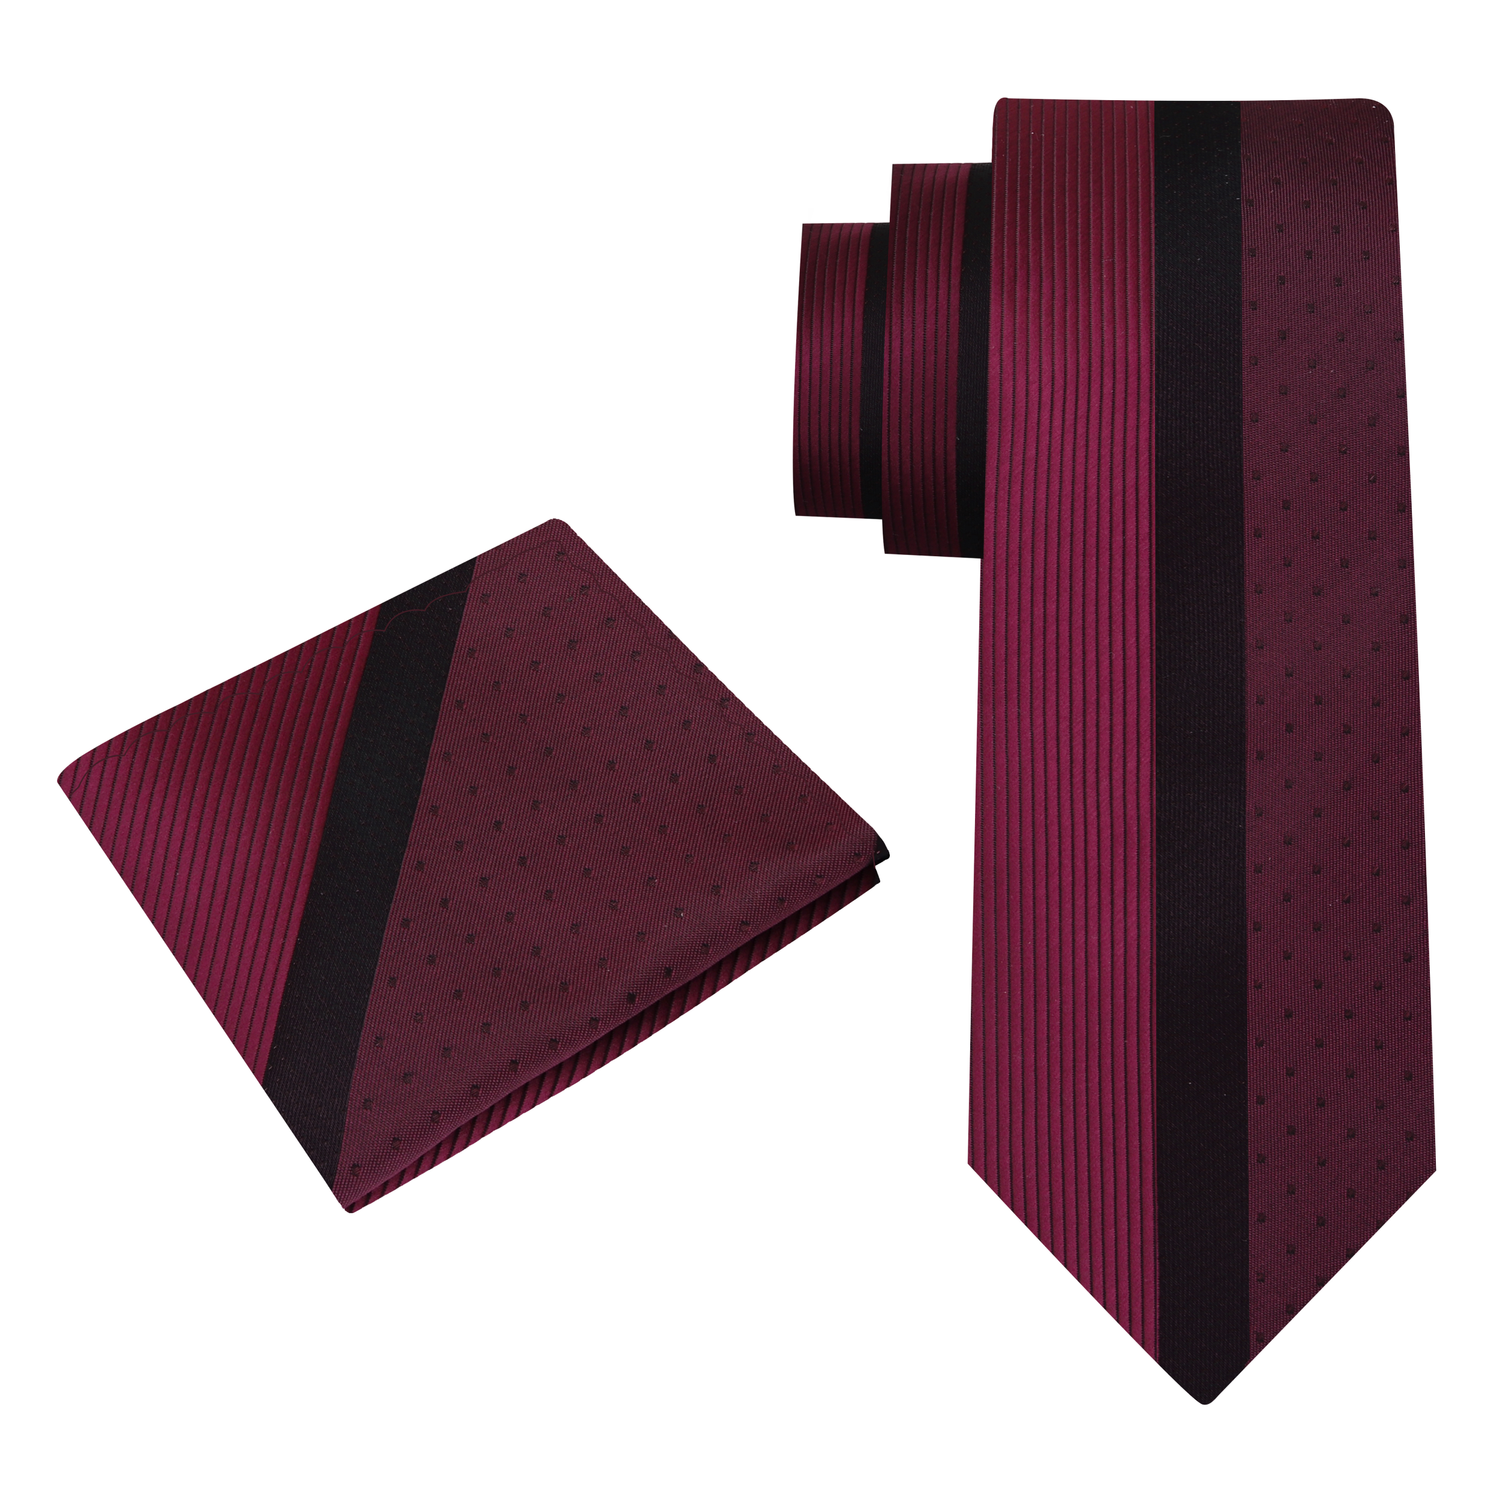 Alt View: Burgundy and Black Lined Necktie and Square